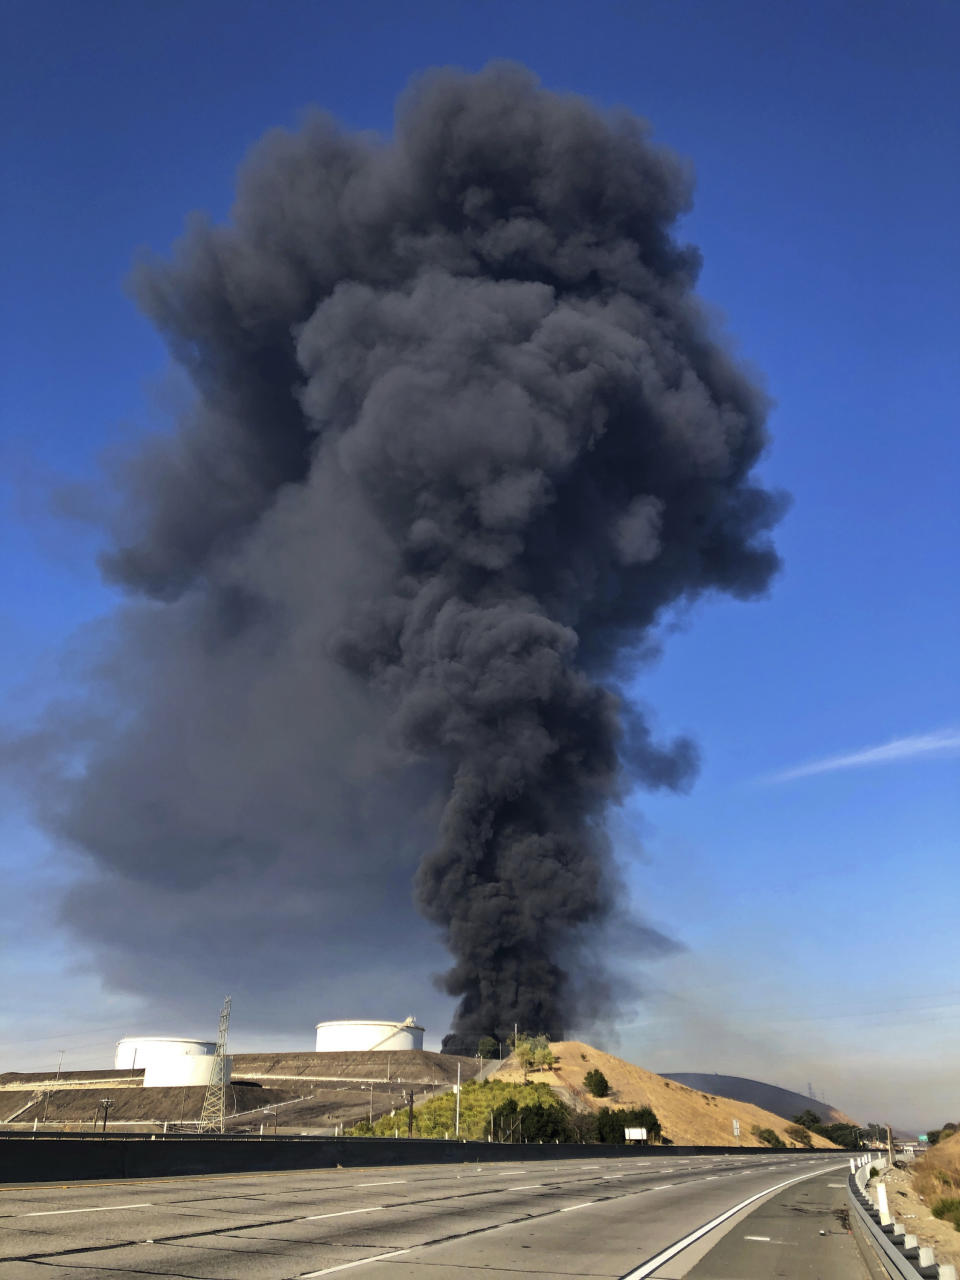 Interstate 80 is closed as a fire at an oil storage facility burns Tuesday, Oct. 15, 2019, in Rodeo, Calif. A fire burning at NuStar Energy LP facility in Crockett, Calif., in the San Francisco Bay Area prompted a hazardous materials emergency that led authorities to order the residents of two communities, including Rodeo, to stay inside with all windows and doors closed. Contra Costa Fire Department spokesman Steve Hill said that an hour into battling the blaze, firefighters seemed to be making progress and were continuing to keep adjacent tanks cooled with water. (AP Photo/Ben Margot)